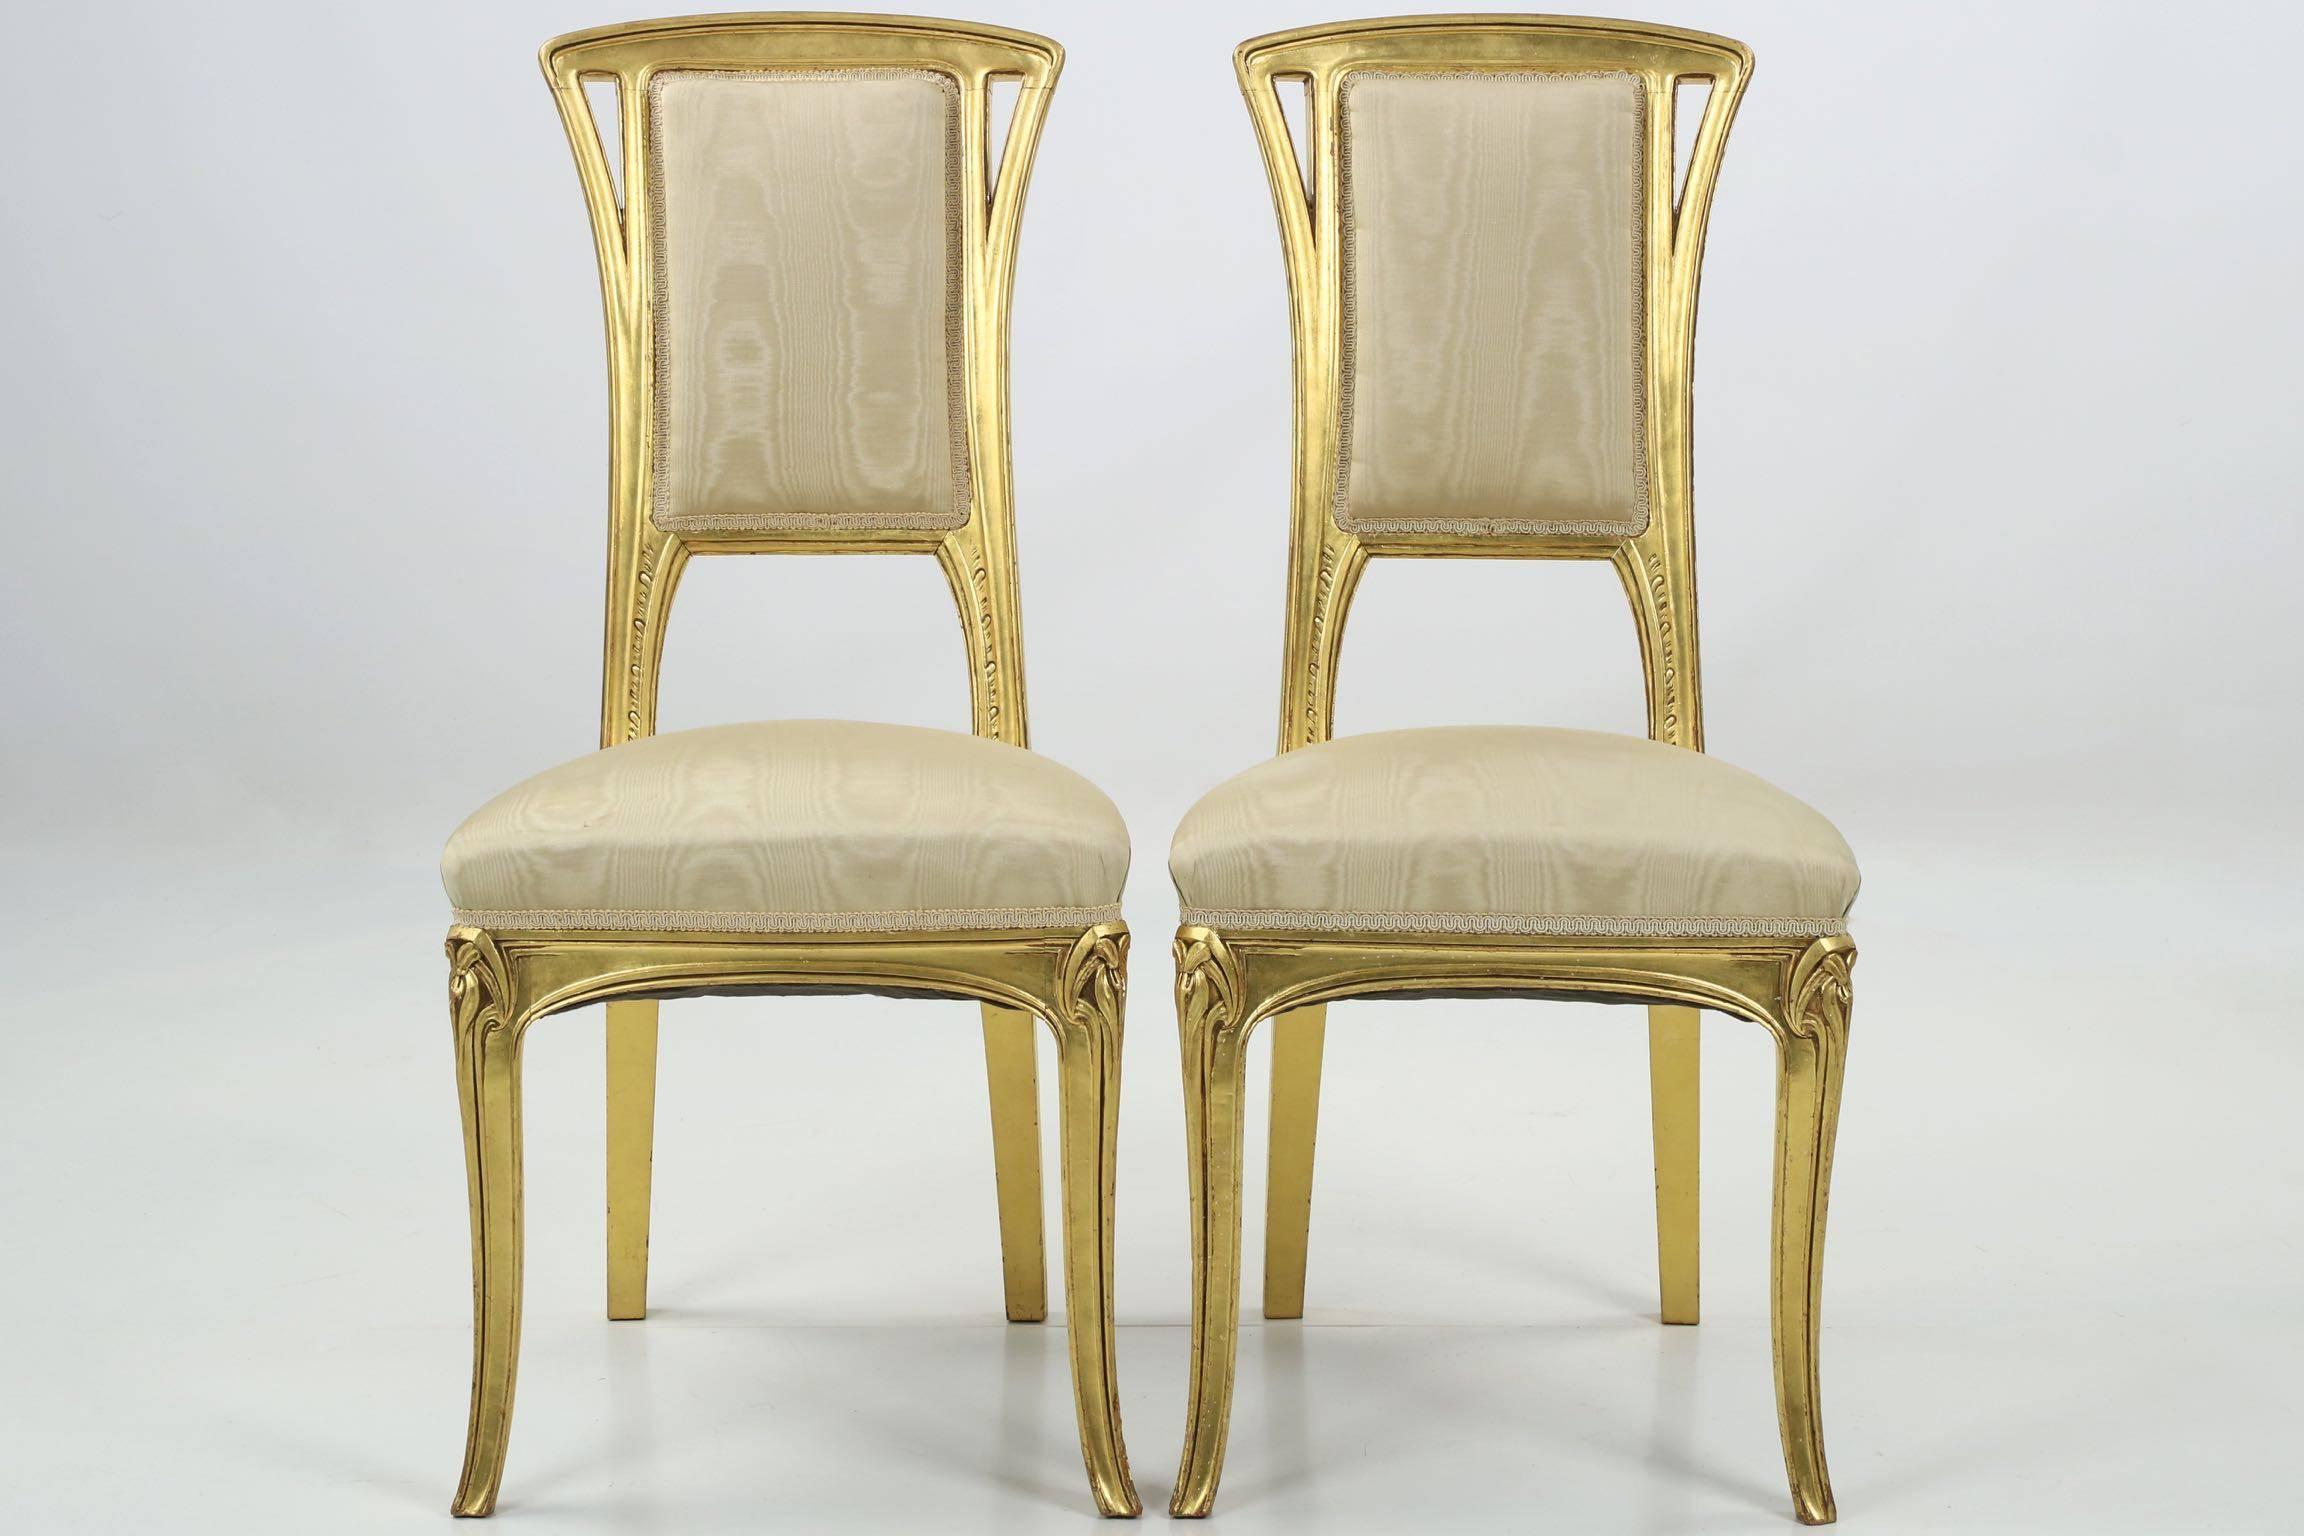 A perfectly designed and proportioned pair of giltwood side chairs, designed almost certainly by the firm of Louis Majorelle during the first years of the 20th century, they exhibit precise and gorgeous craftsmanship throughout their remarkably